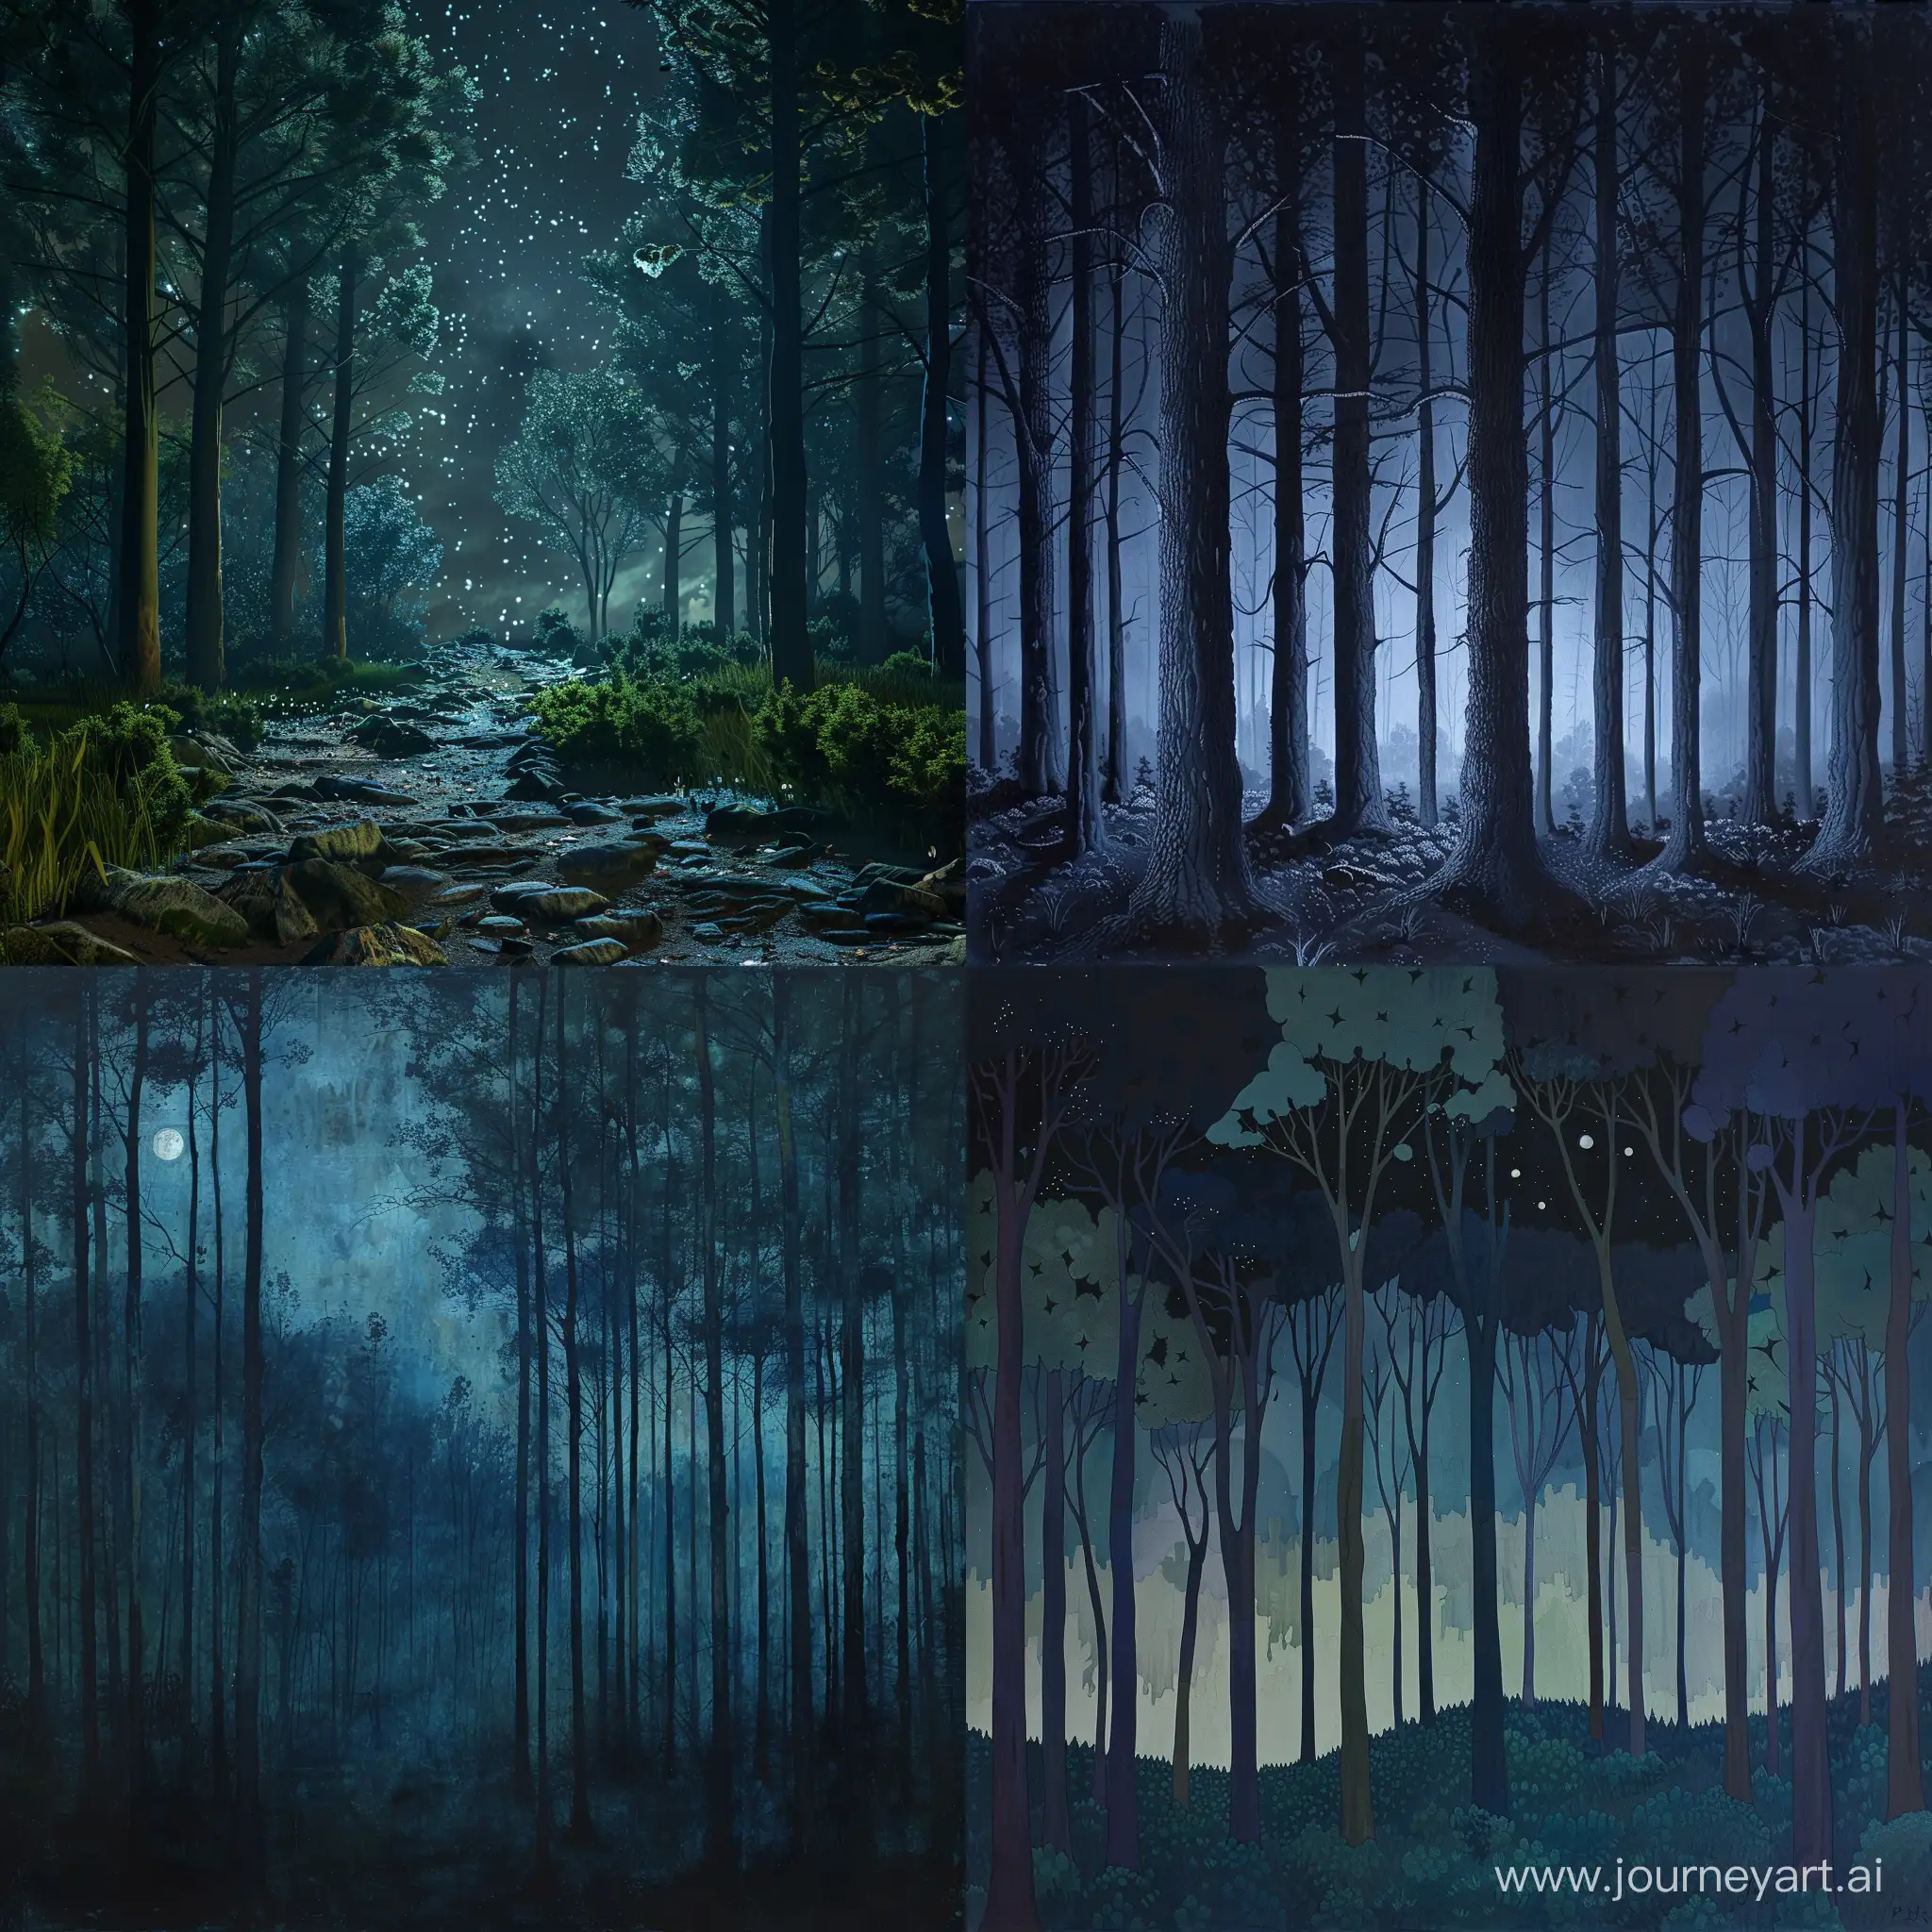 FOREST AT NIGHT
